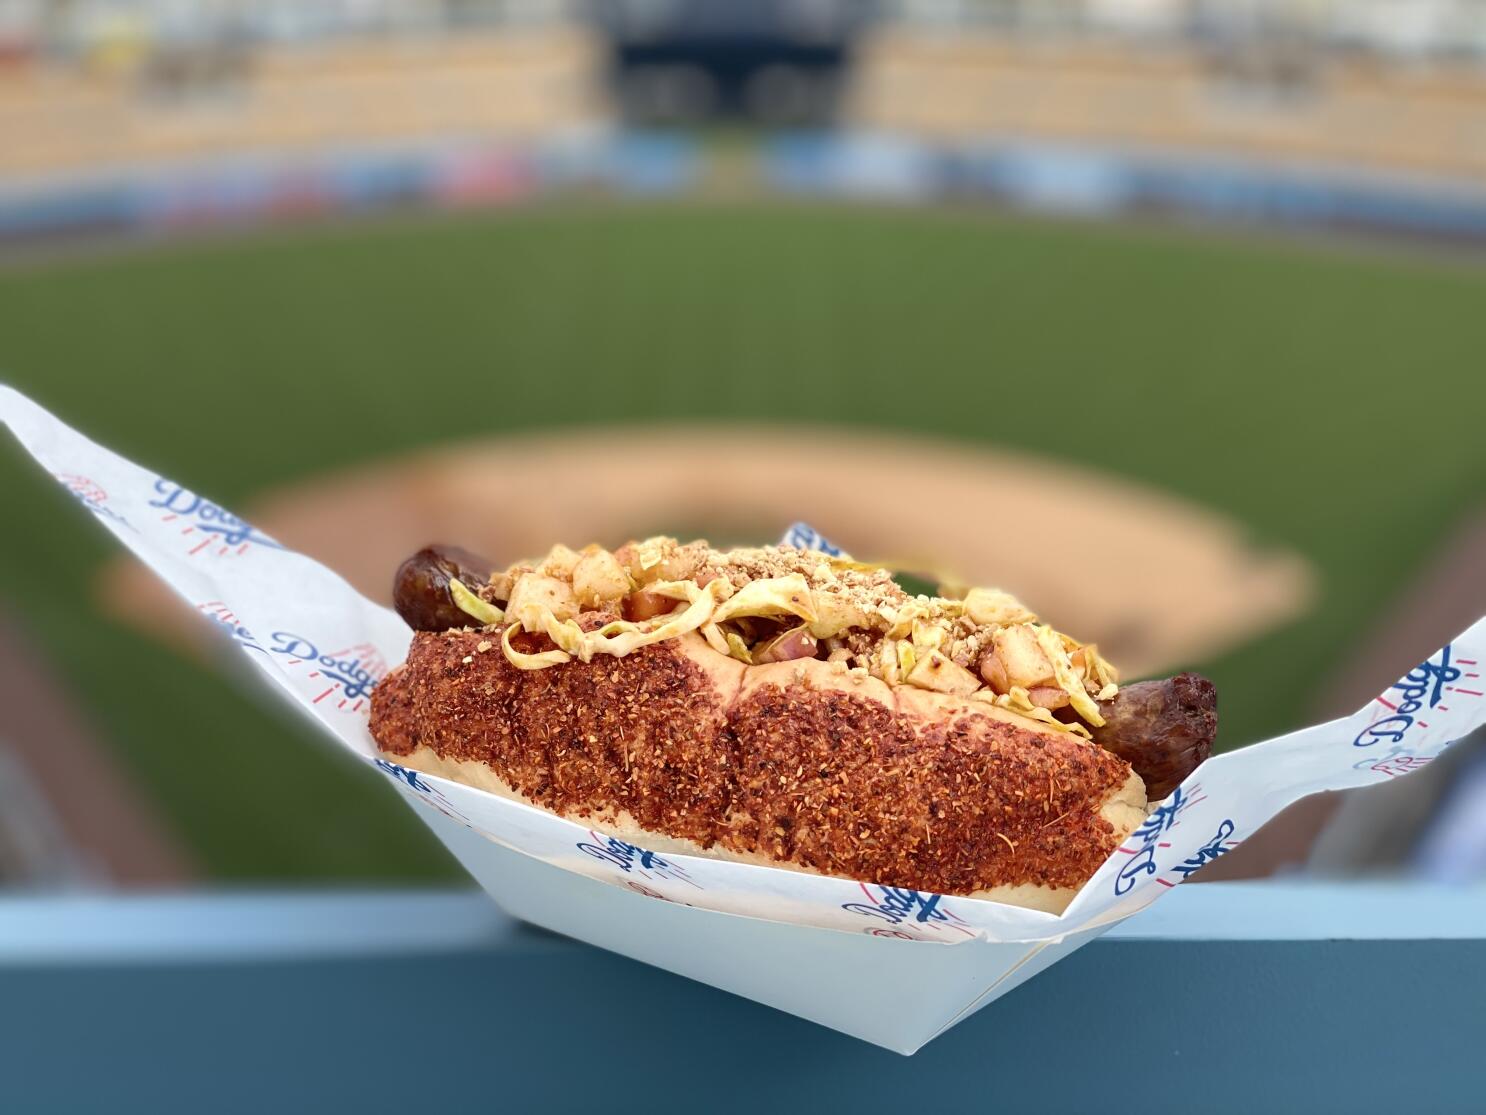 Rangers introduce new food items, team shop during ALDS